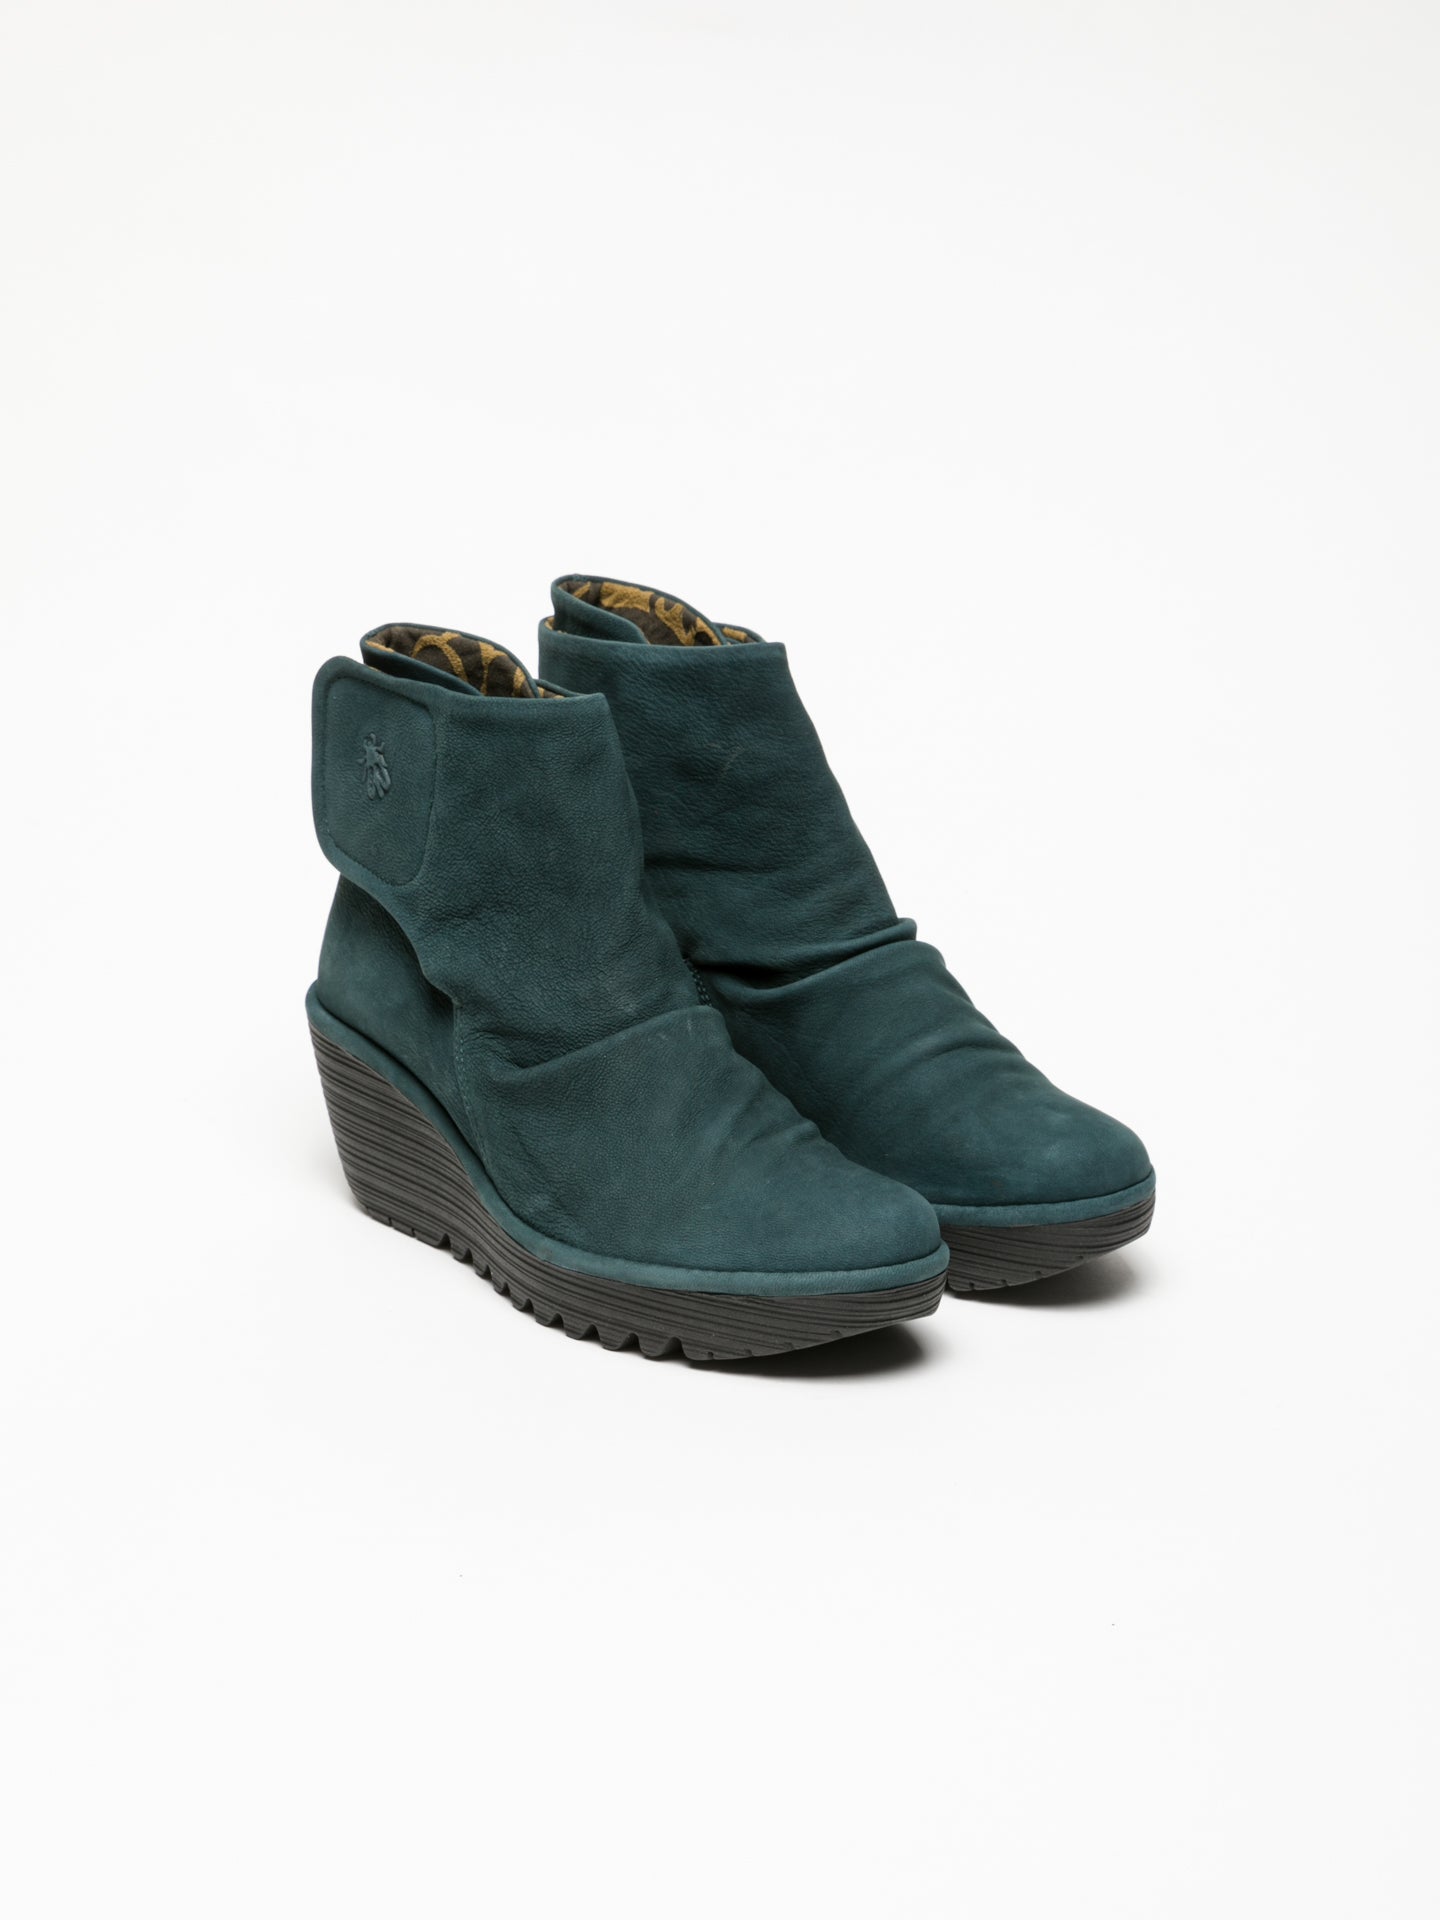 Fly London Green Velcro Ankle Boots